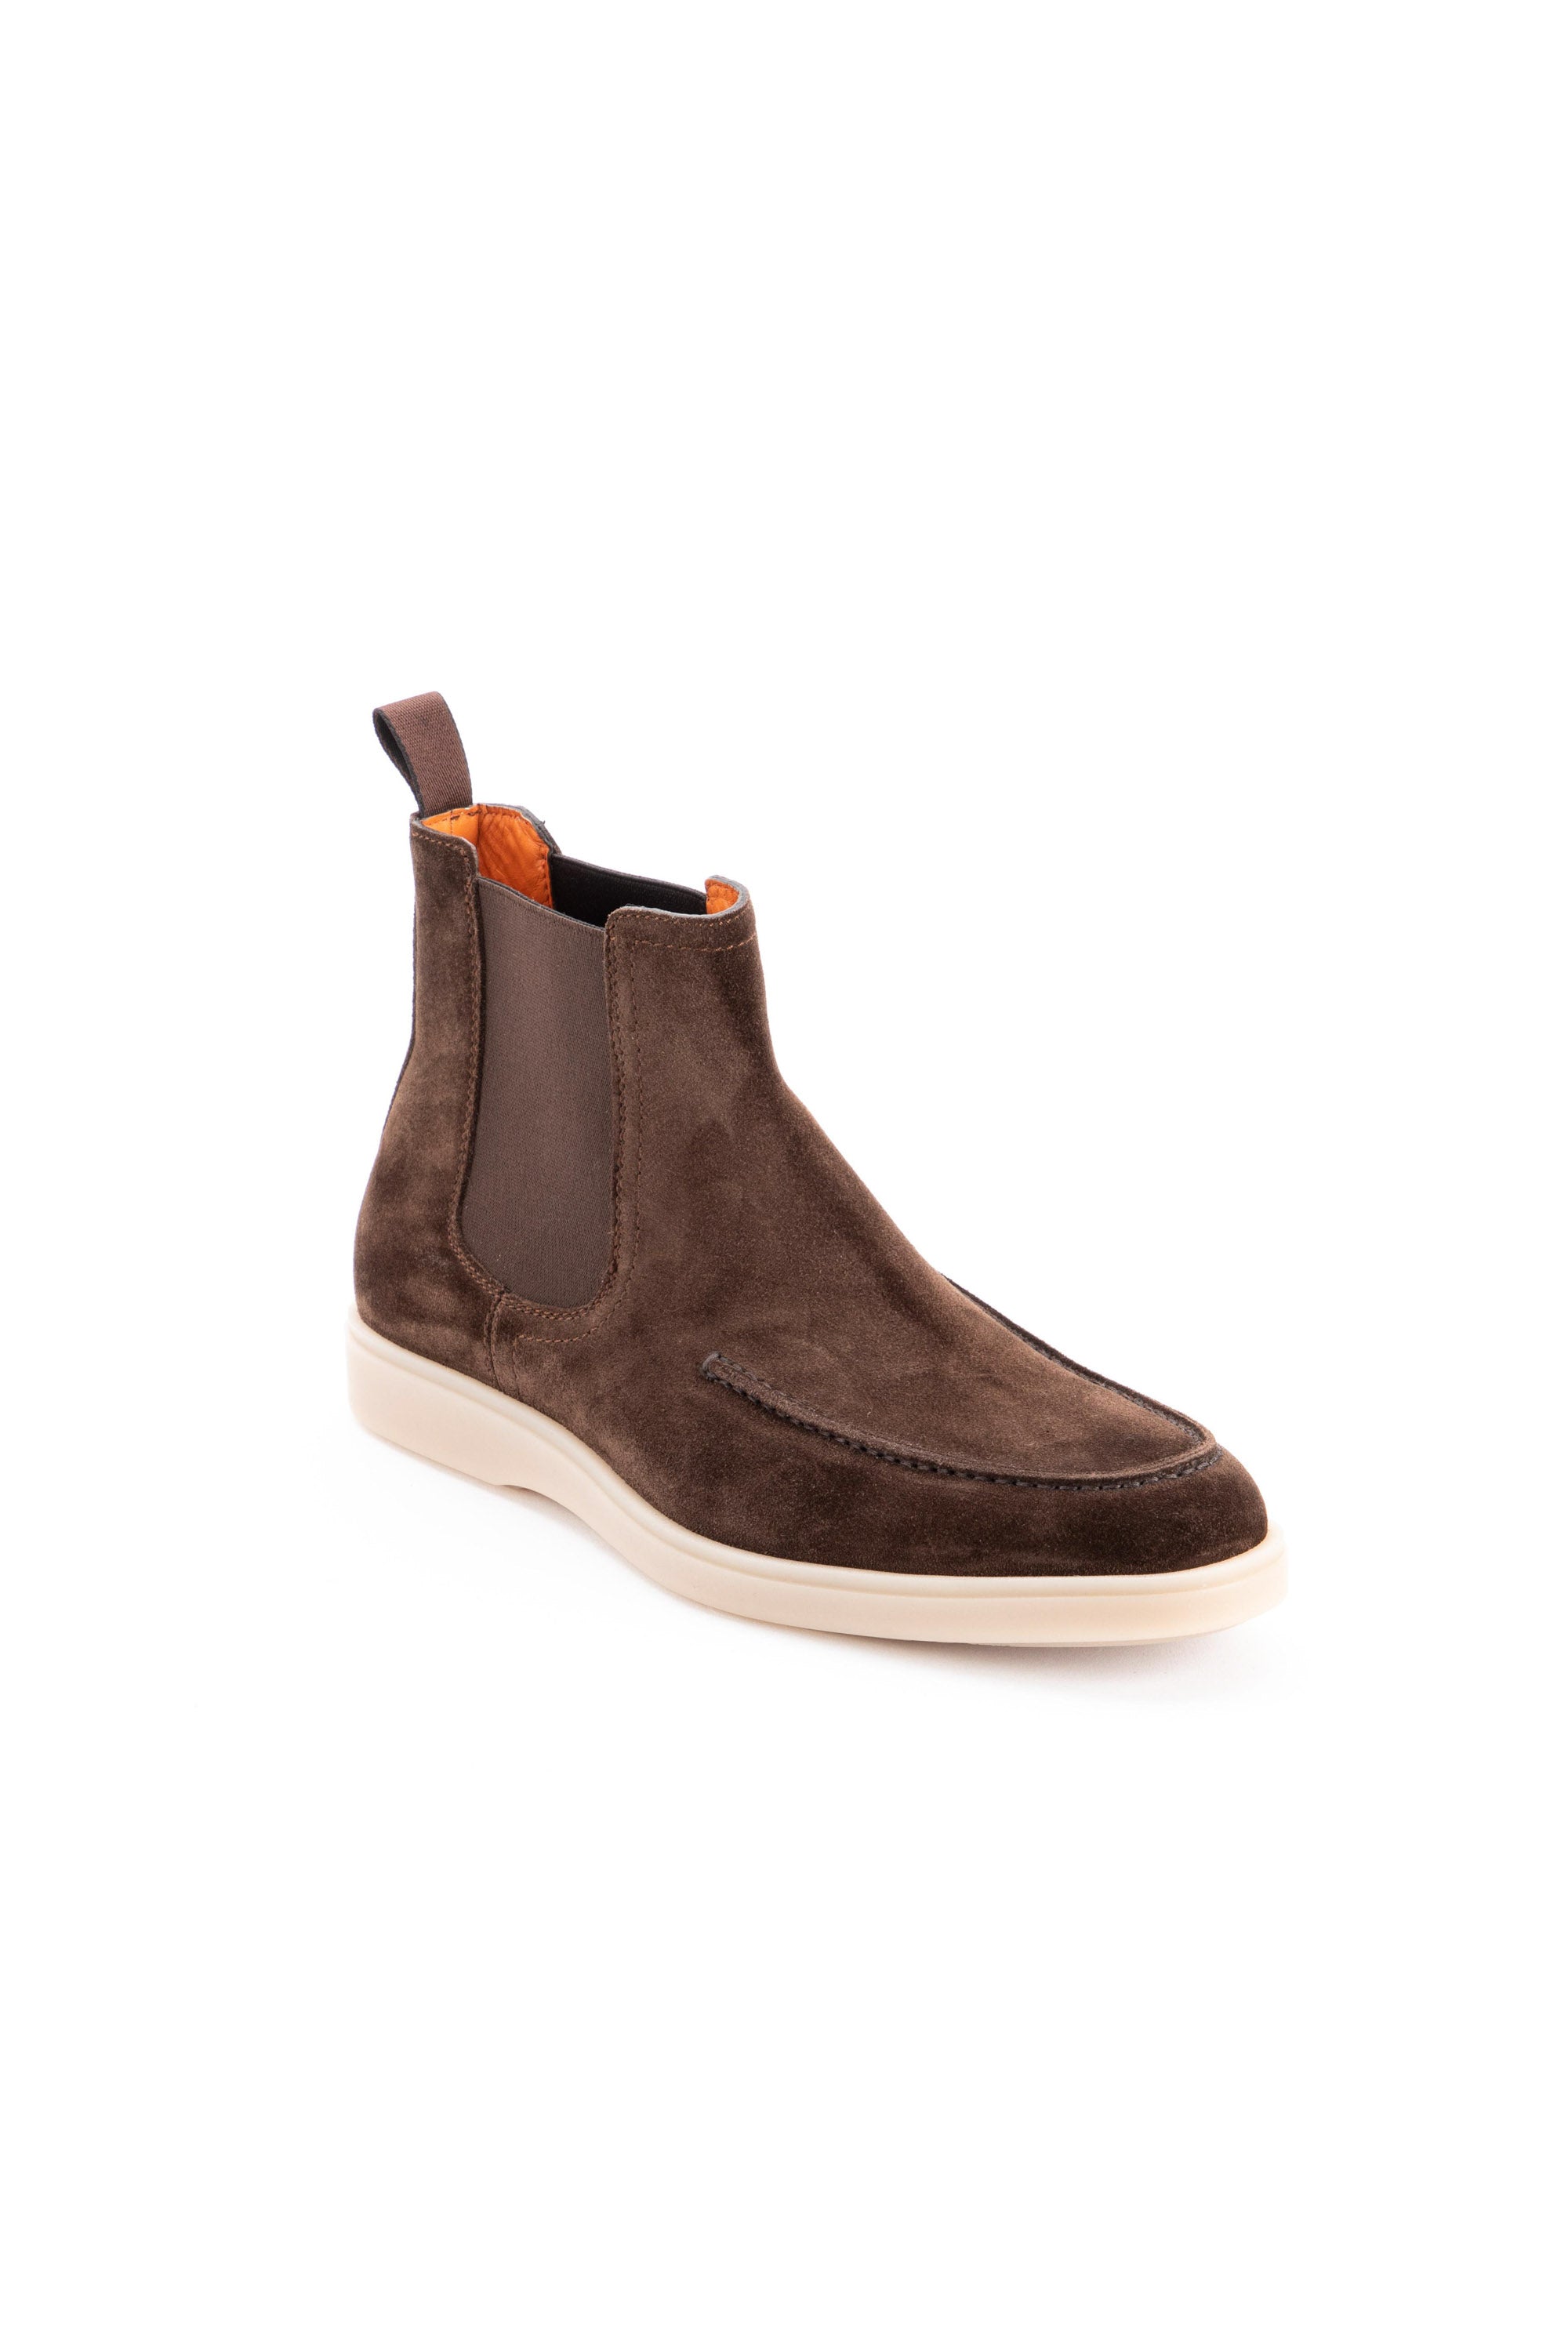 Suede ankle boot with non-slip rubber sole